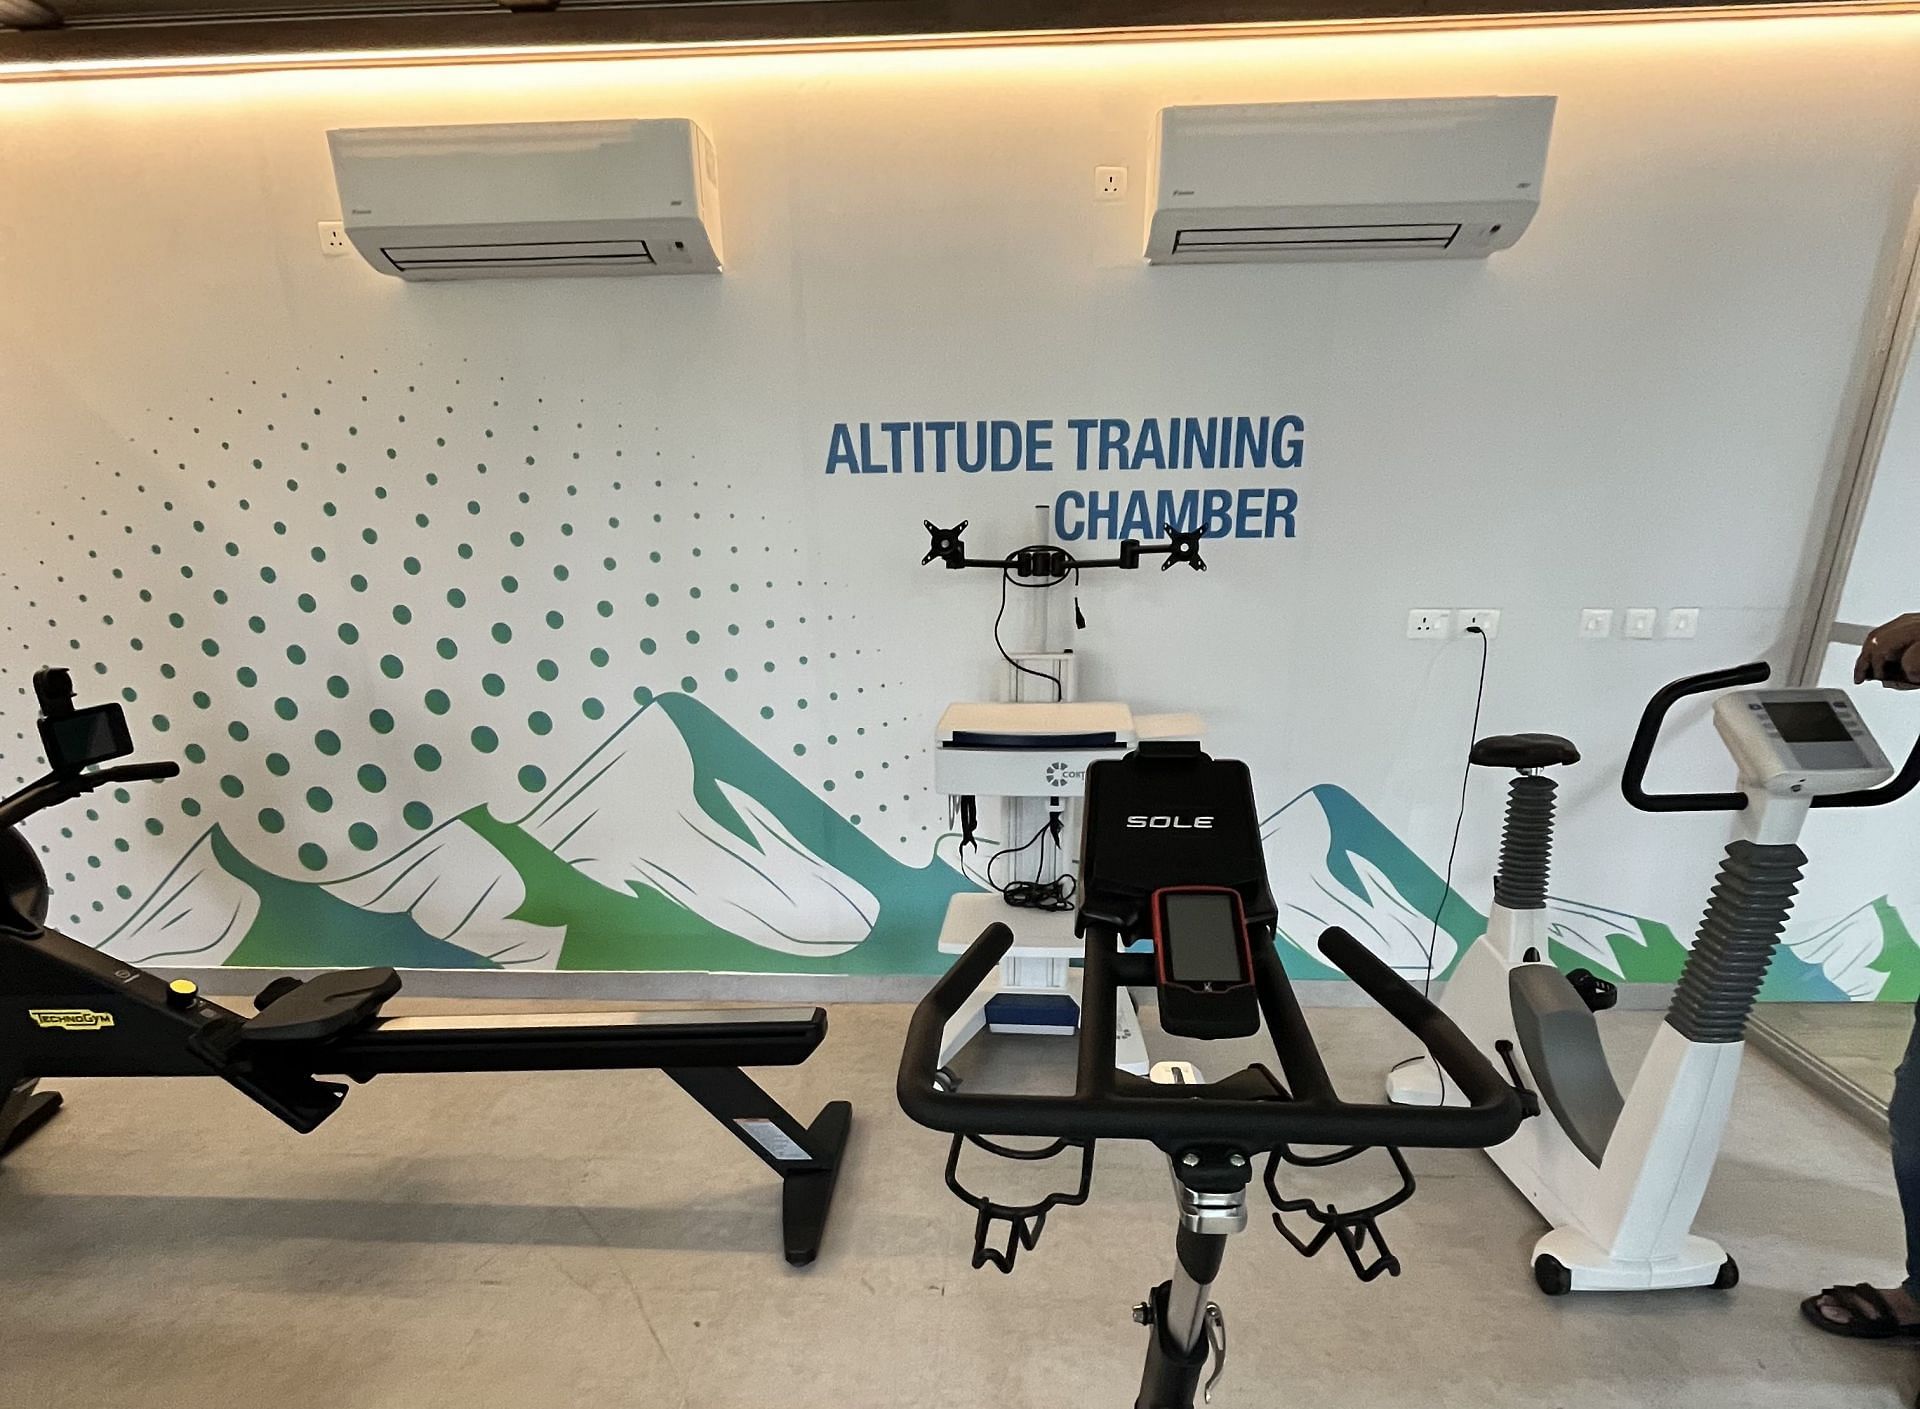 The Altitude Training Chamber at the Sports Science Centre in Odisha. (Picture Credits: Maanas Upadhyay)